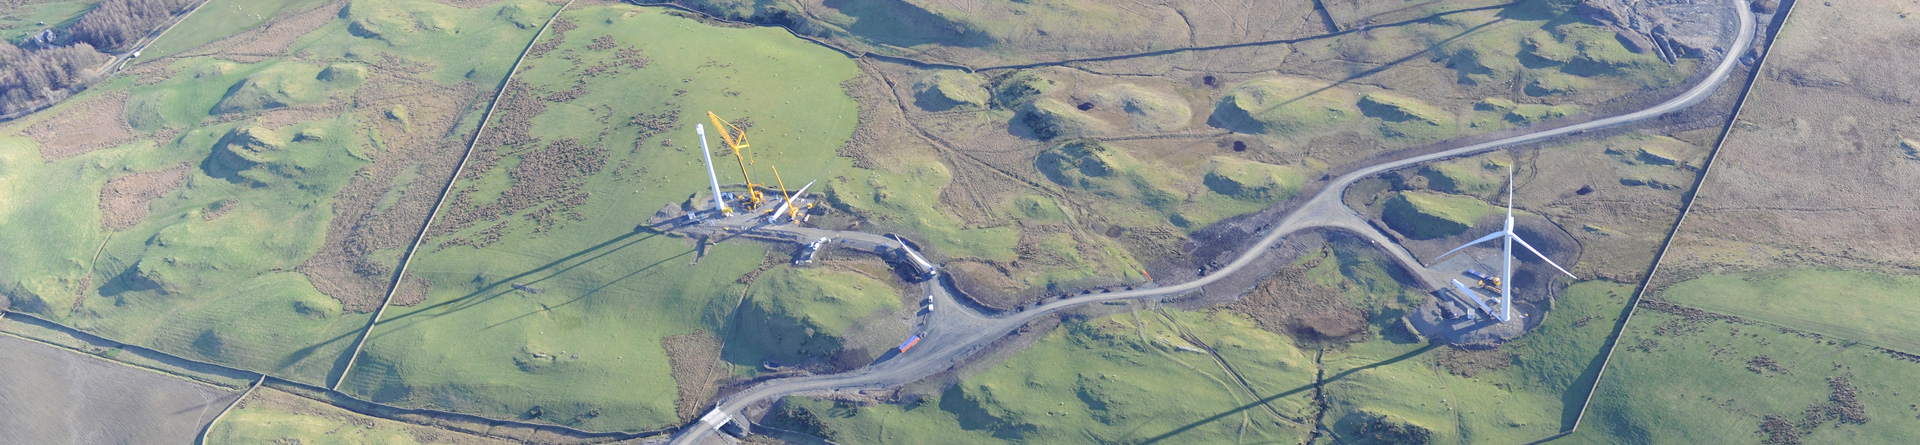 Colour aerial photograph showing one complete wind turbine and one under construction with the cranes and construction road